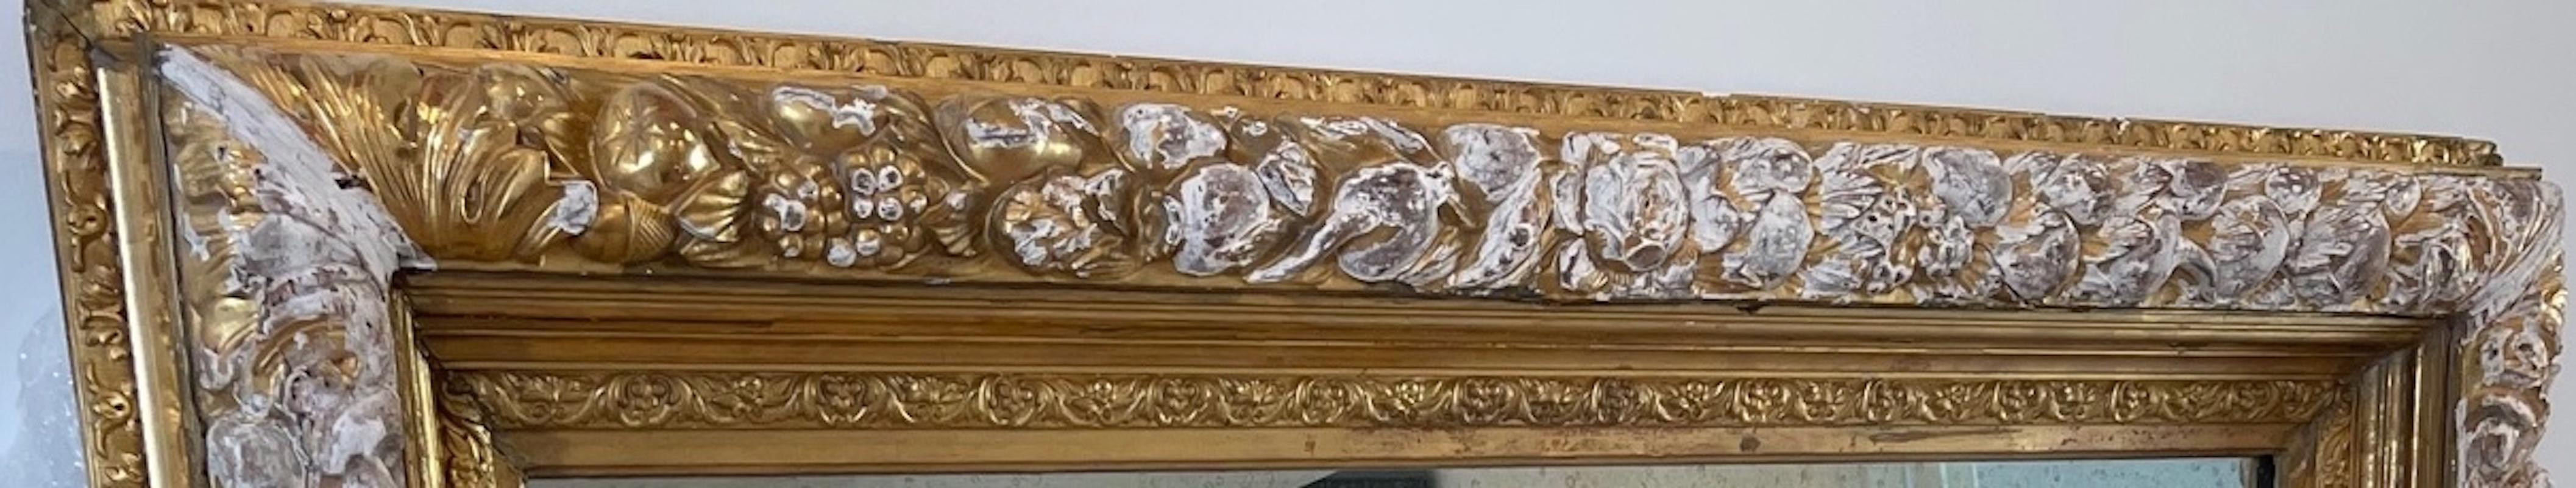 French 19th Century Hand-Carved Gold-Leaf Louis XVI Mirror For Sale 2